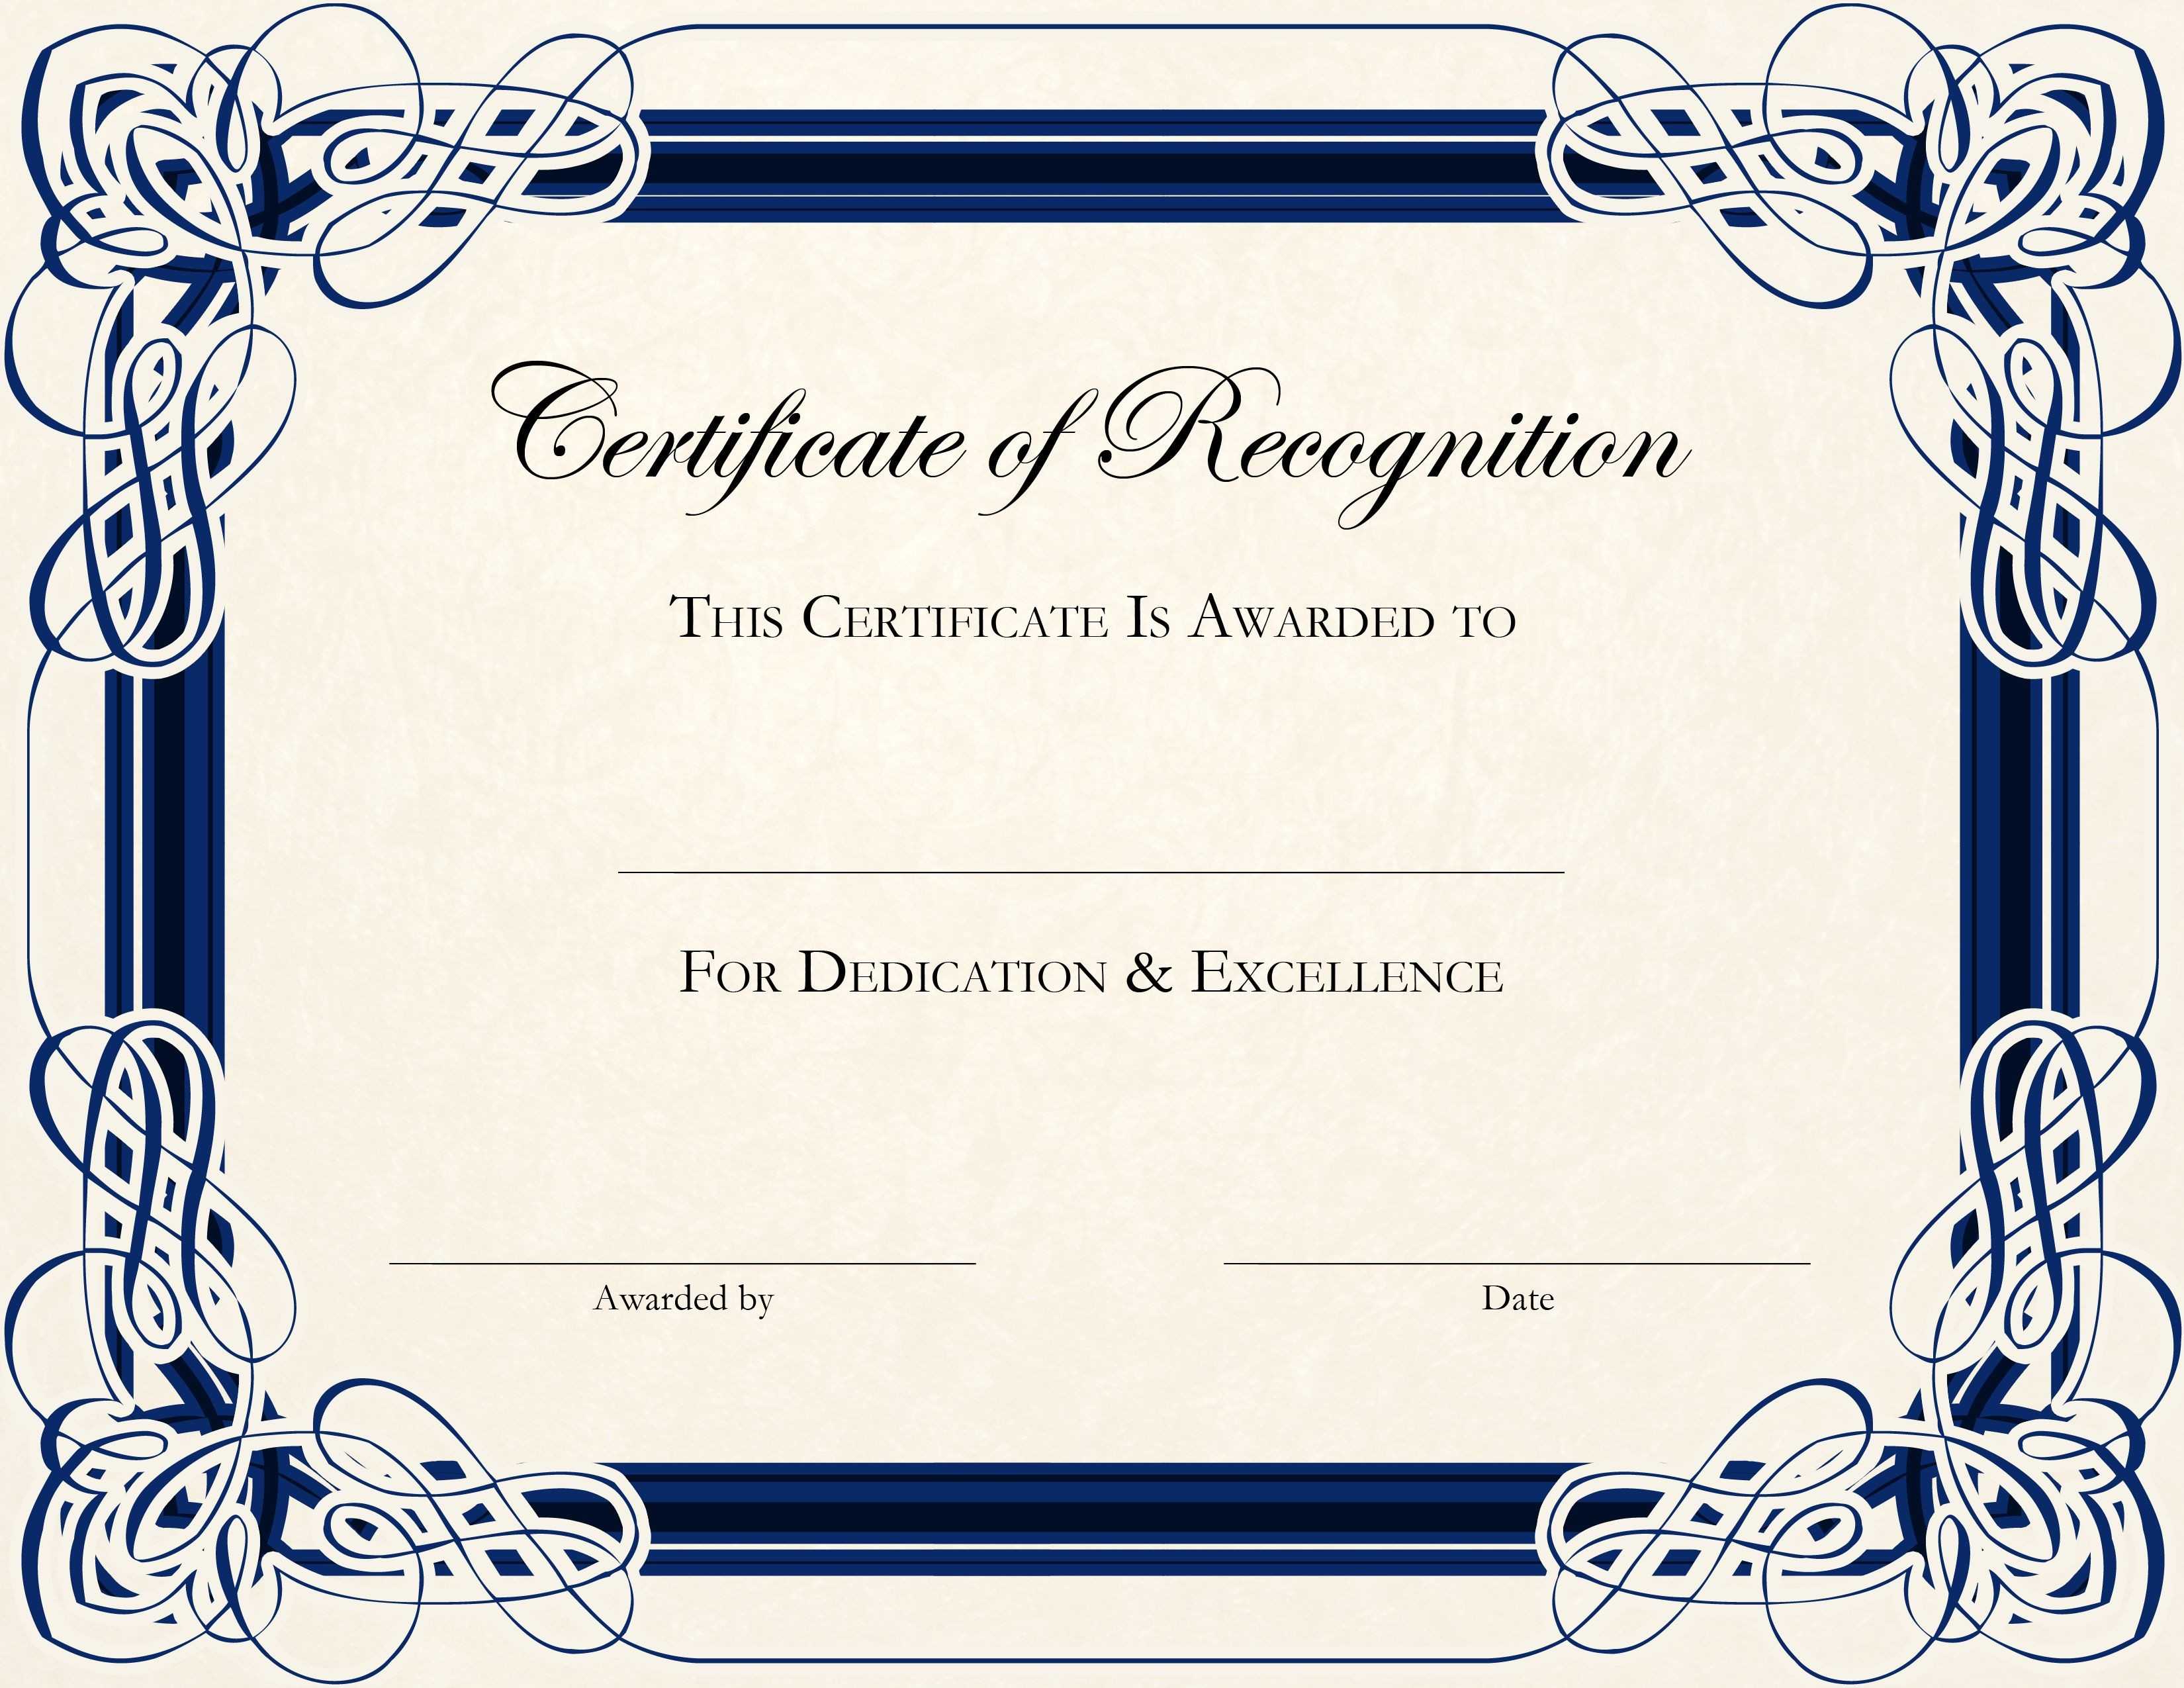 Certificate Template Designs Recognition Docs | Blankets Within Printable Certificate Of Recognition Templates Free